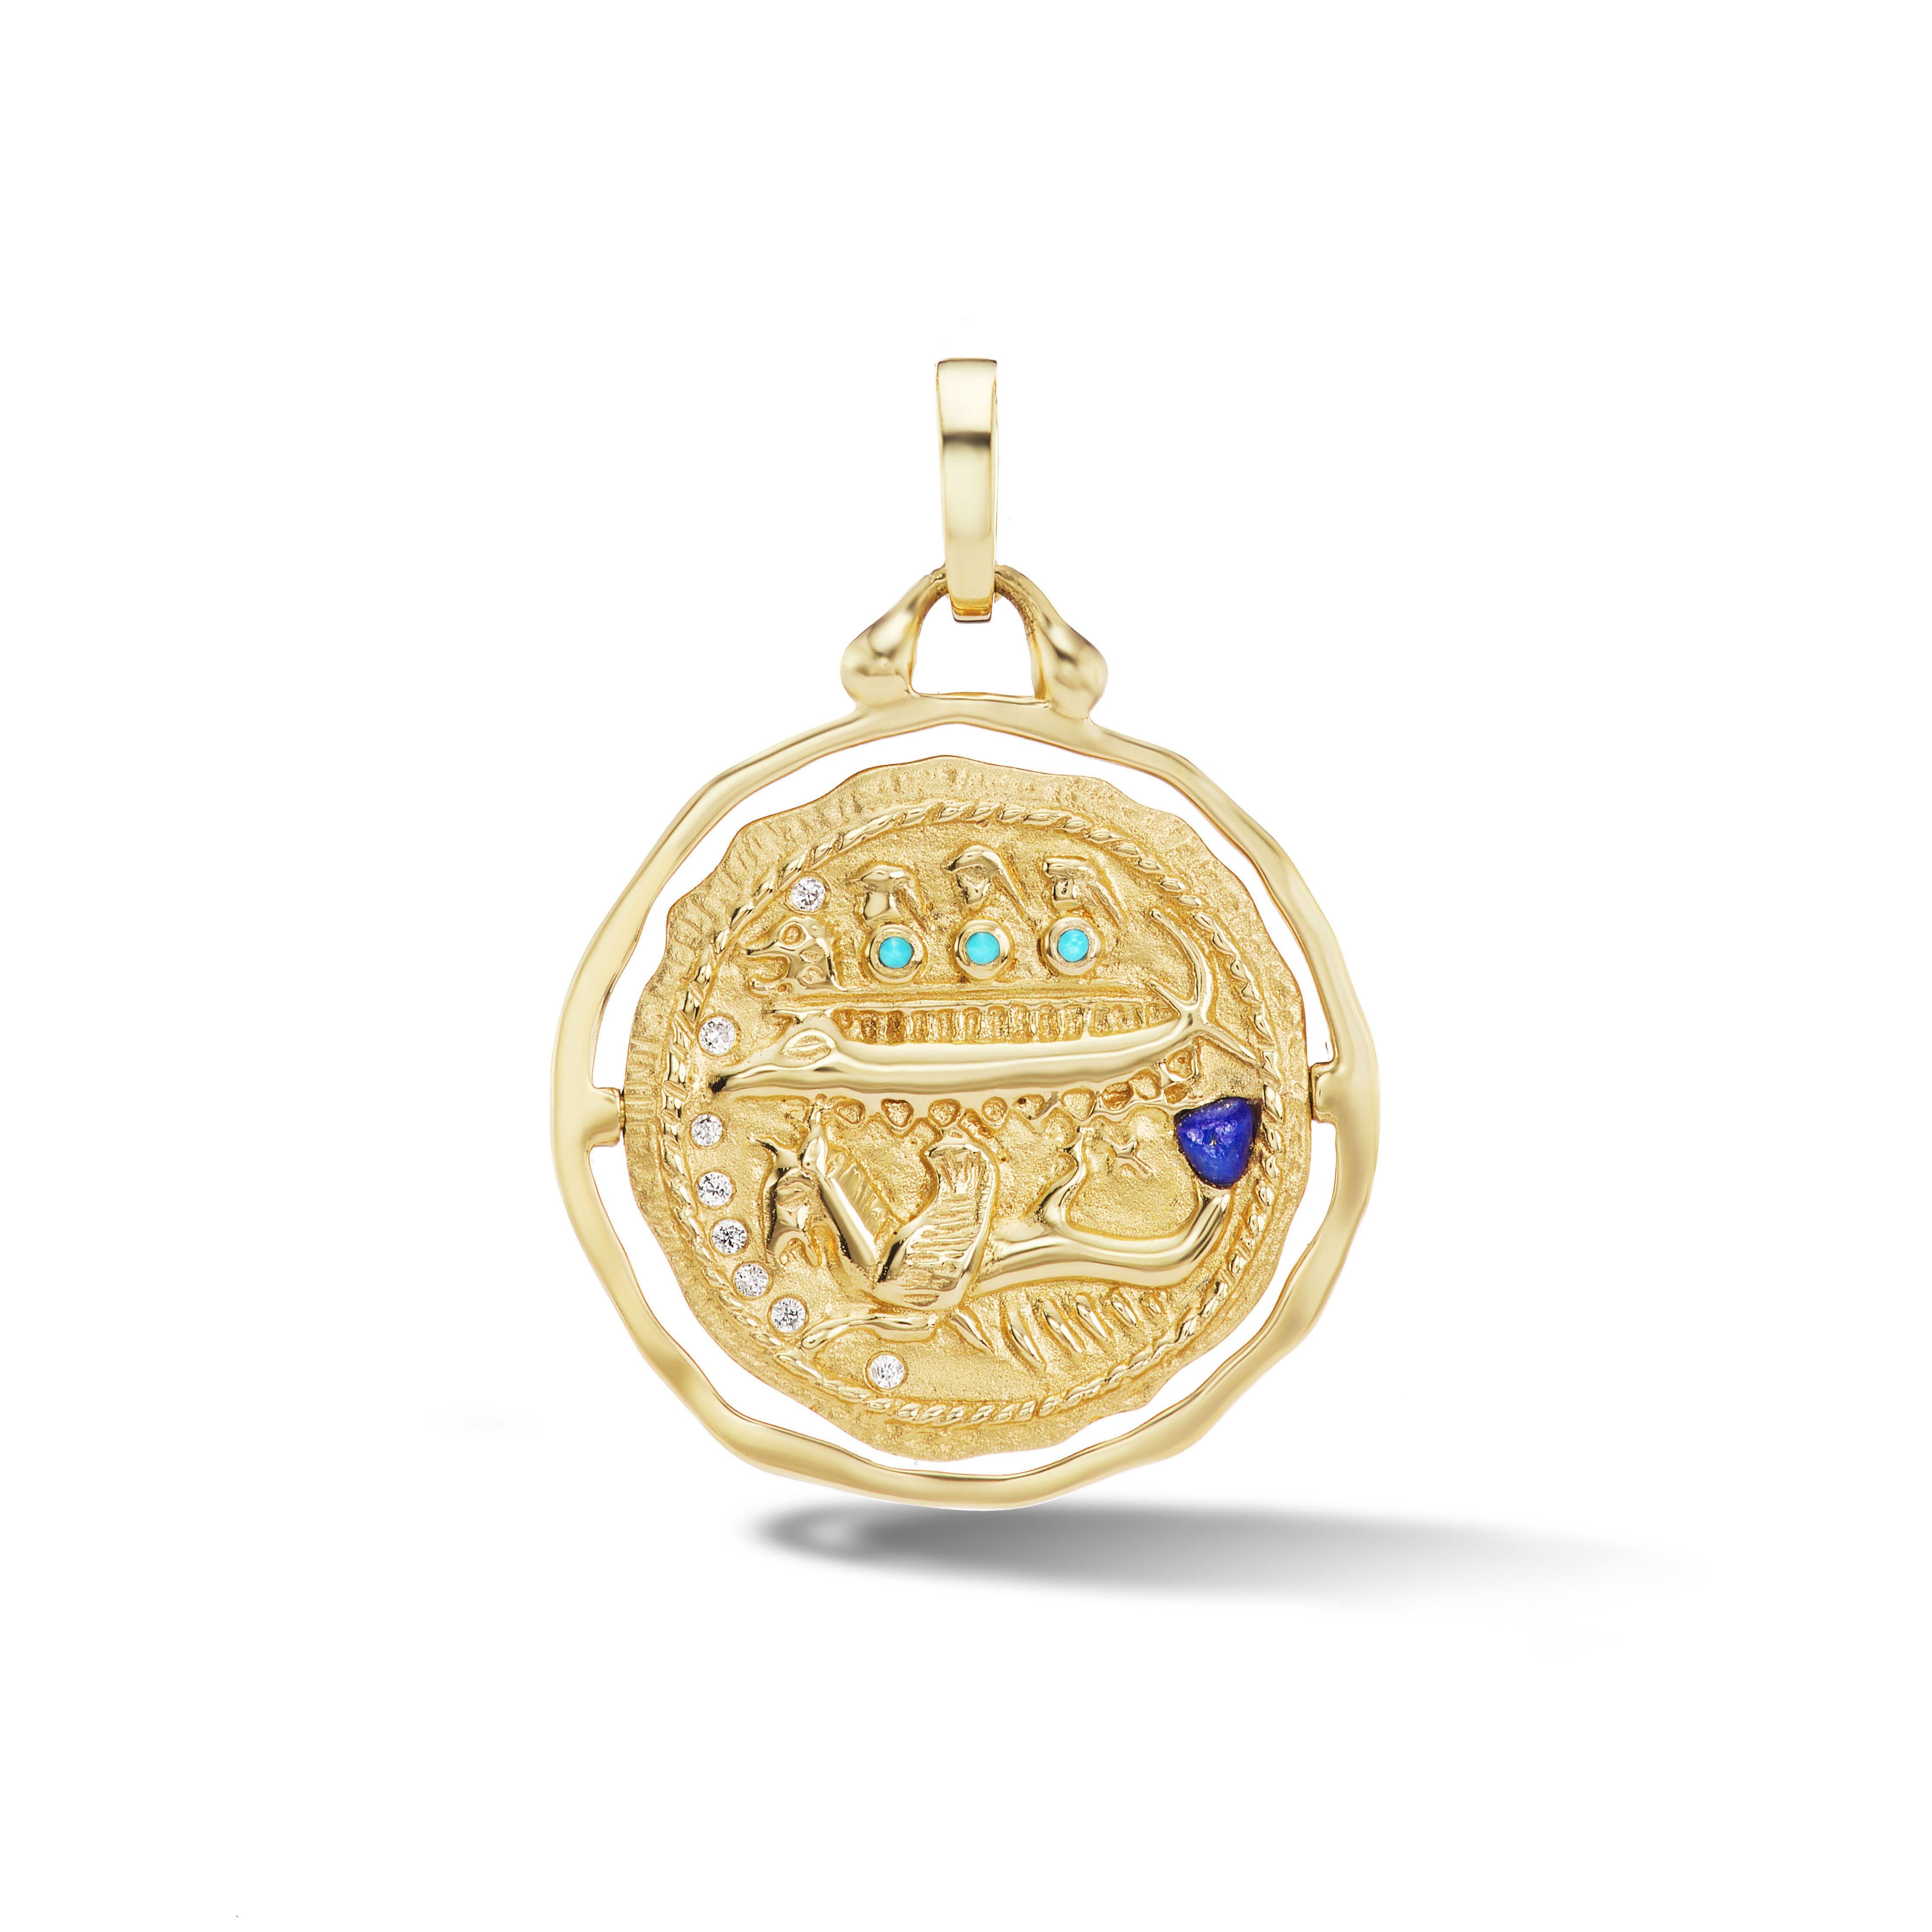 This double-sided coin can be flipped within its circular frame and worn on either side. The amulet symbolizes protection and is hand carved out of lustrous 18k yellow gold featuring turquoise hoplite shields and a hand-carved lapis Hippocamp